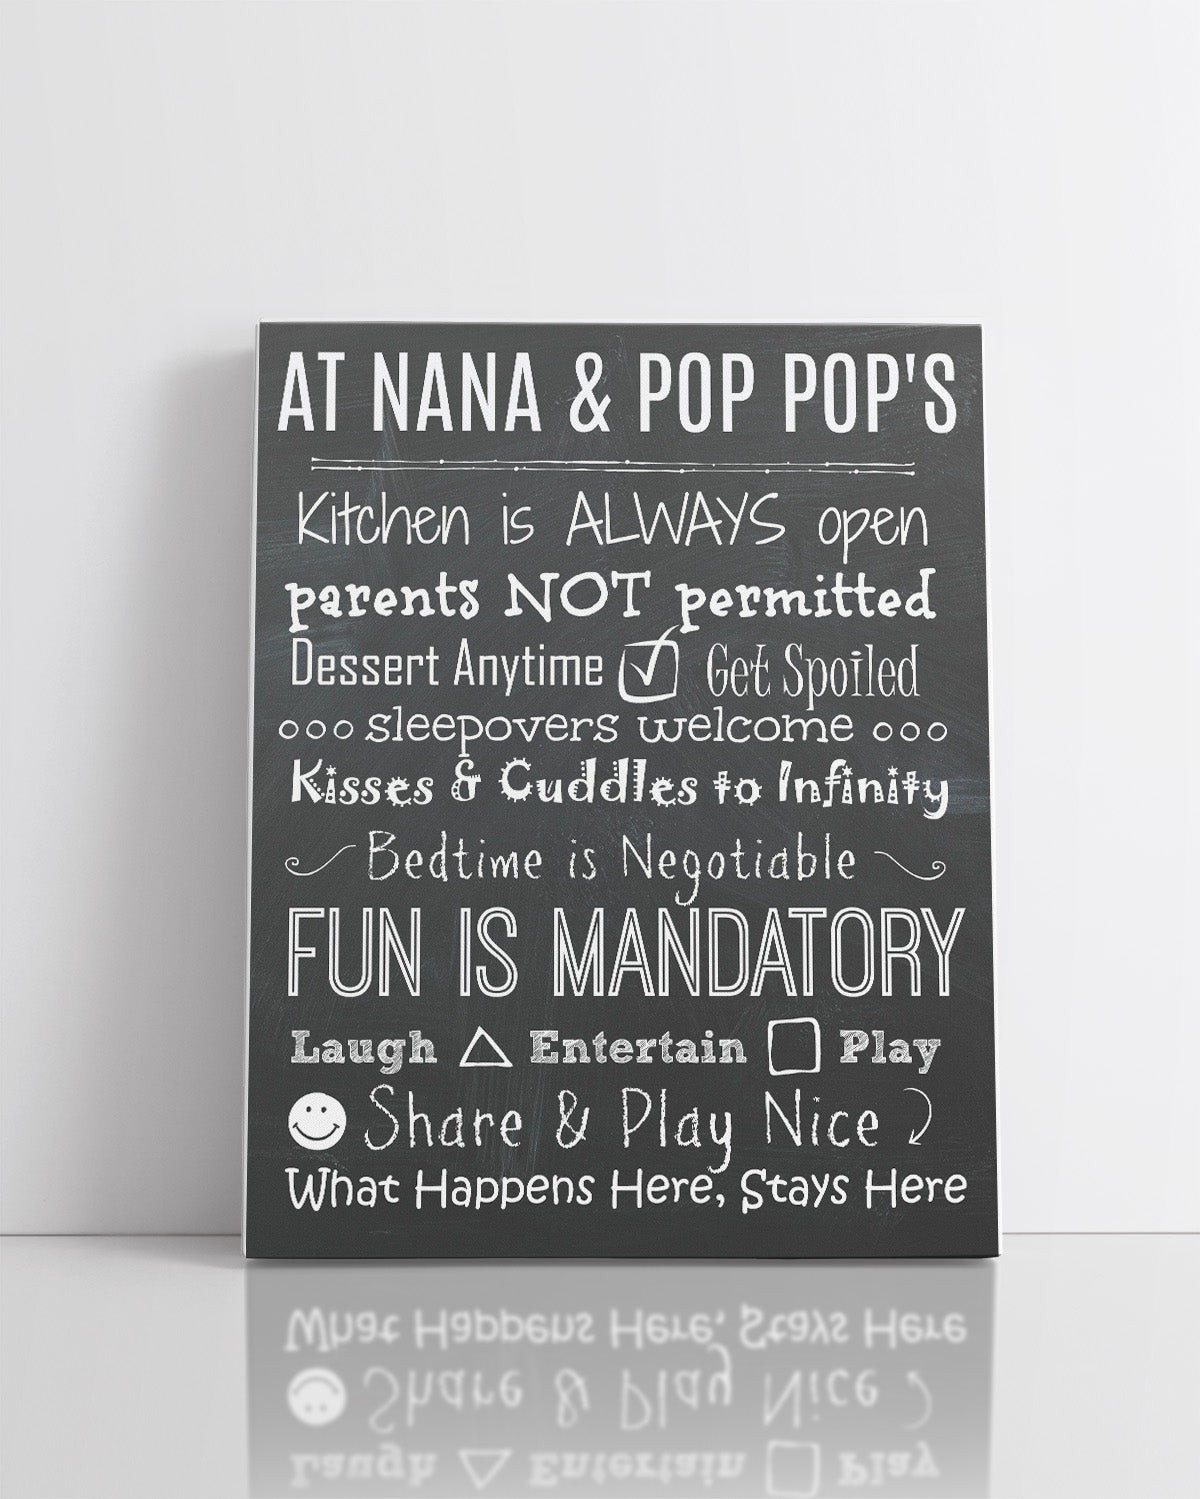 Grandparents House Rules Sign Wall Art - Gifts for Grandparents - Grandparents Day Gift Ideas - Best Gifts for Grandparents Wall Decor